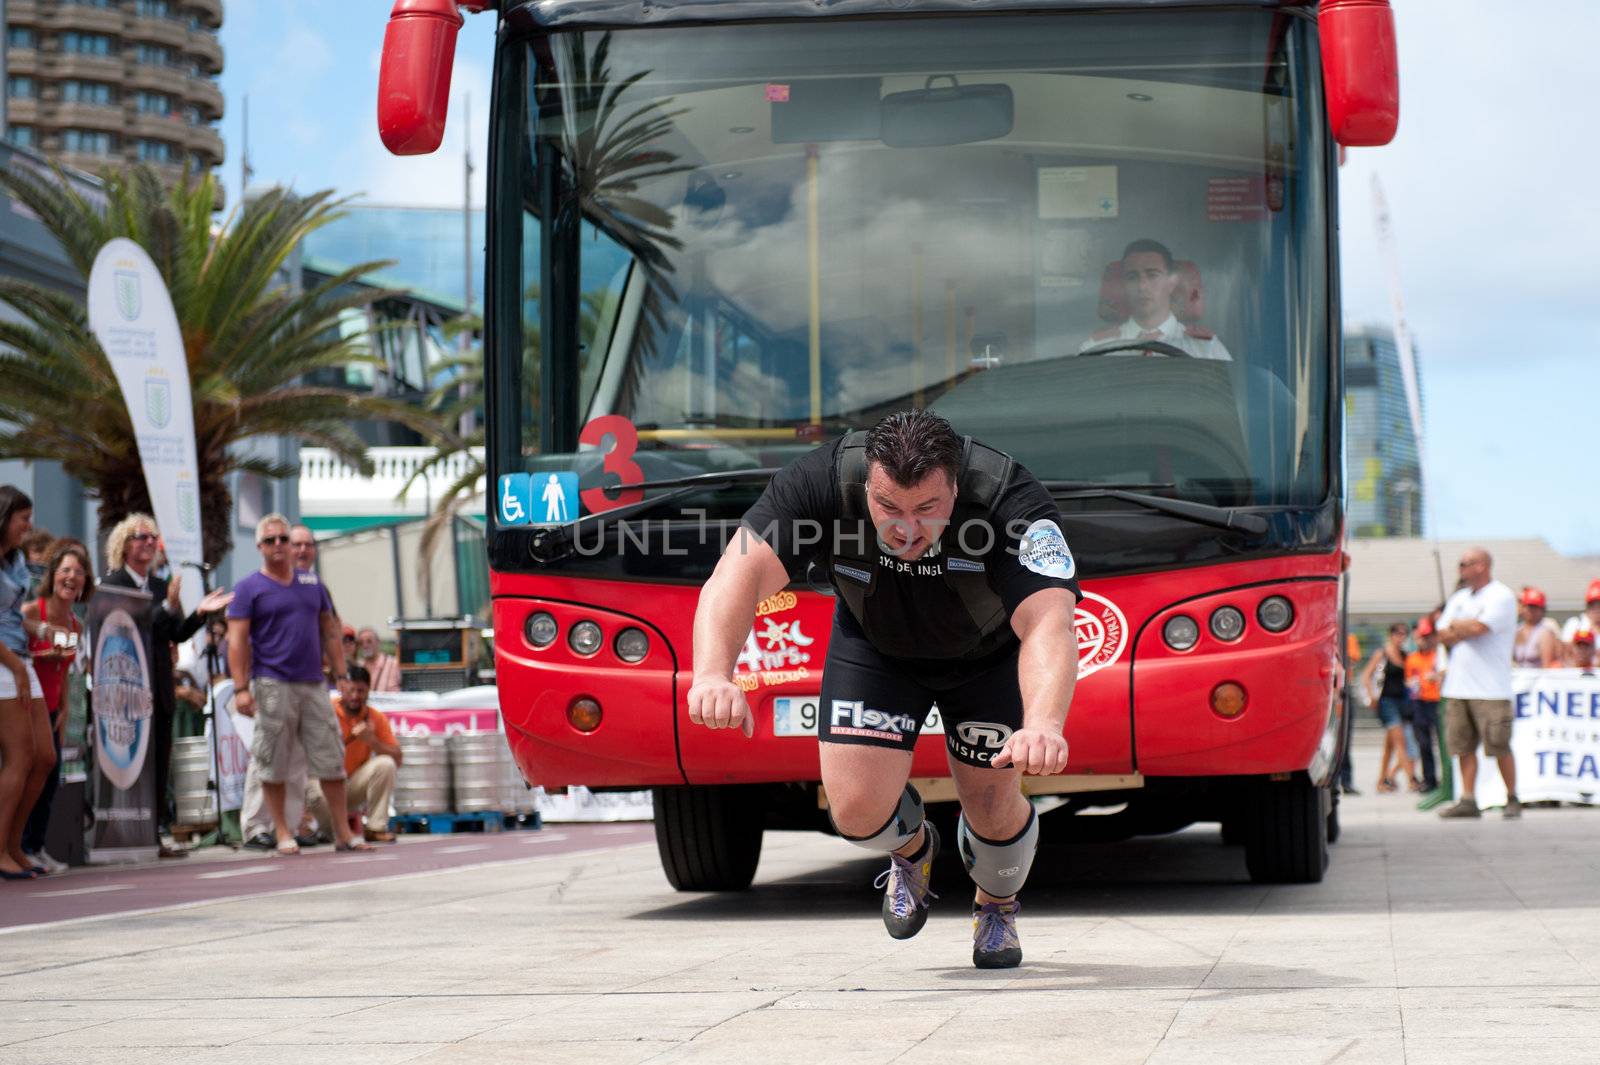 CANARY ISLANDS – SEPTEMBER 03: Arno Hams from Holland pulling a double-decker bus behind himself during Strongman Champions League in Las Palmas September 03, 2011 in Canary Islands, Spain